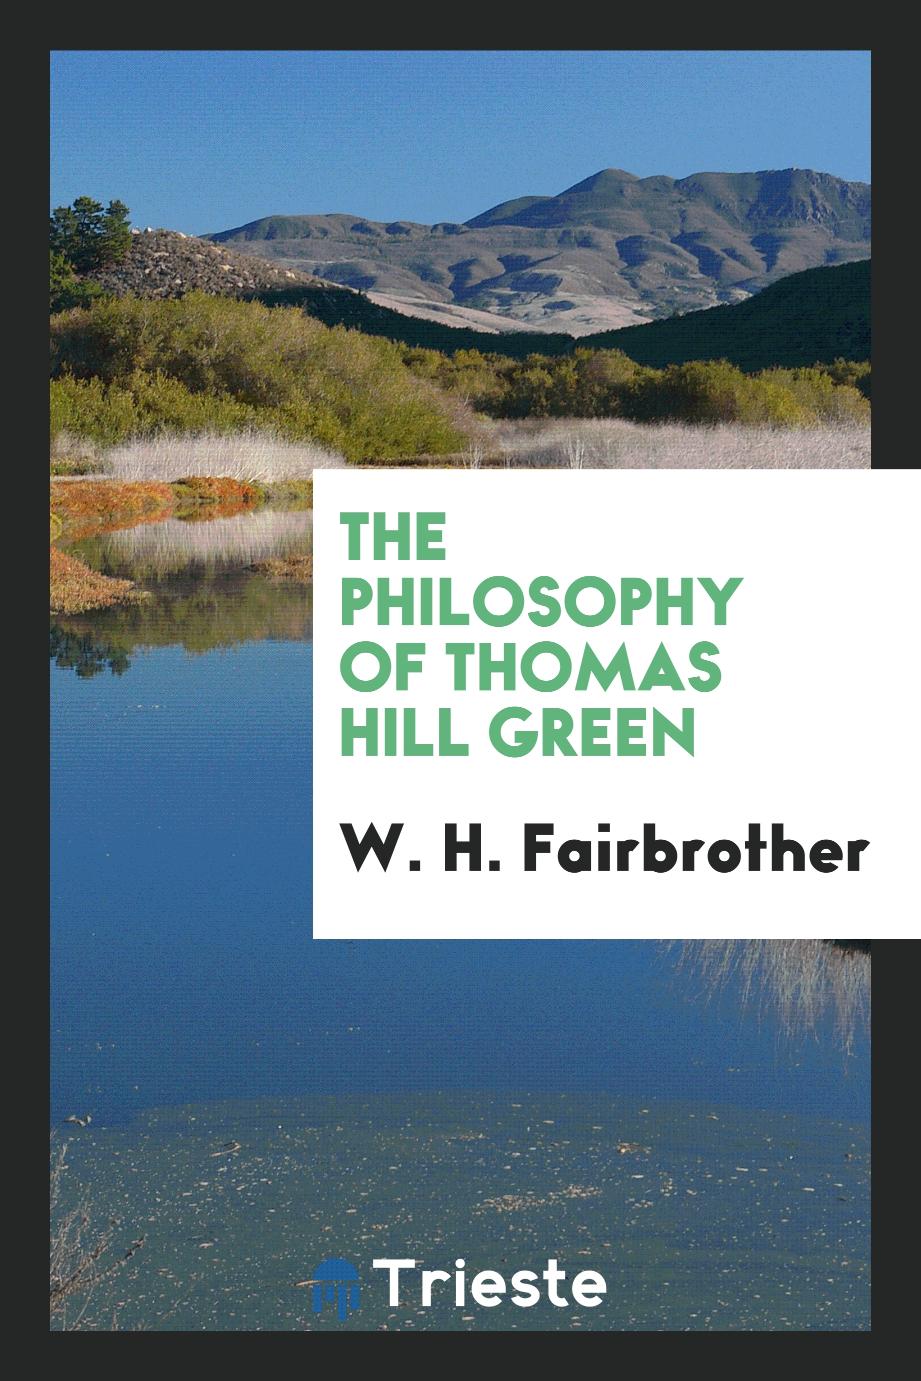 The philosophy of Thomas Hill Green